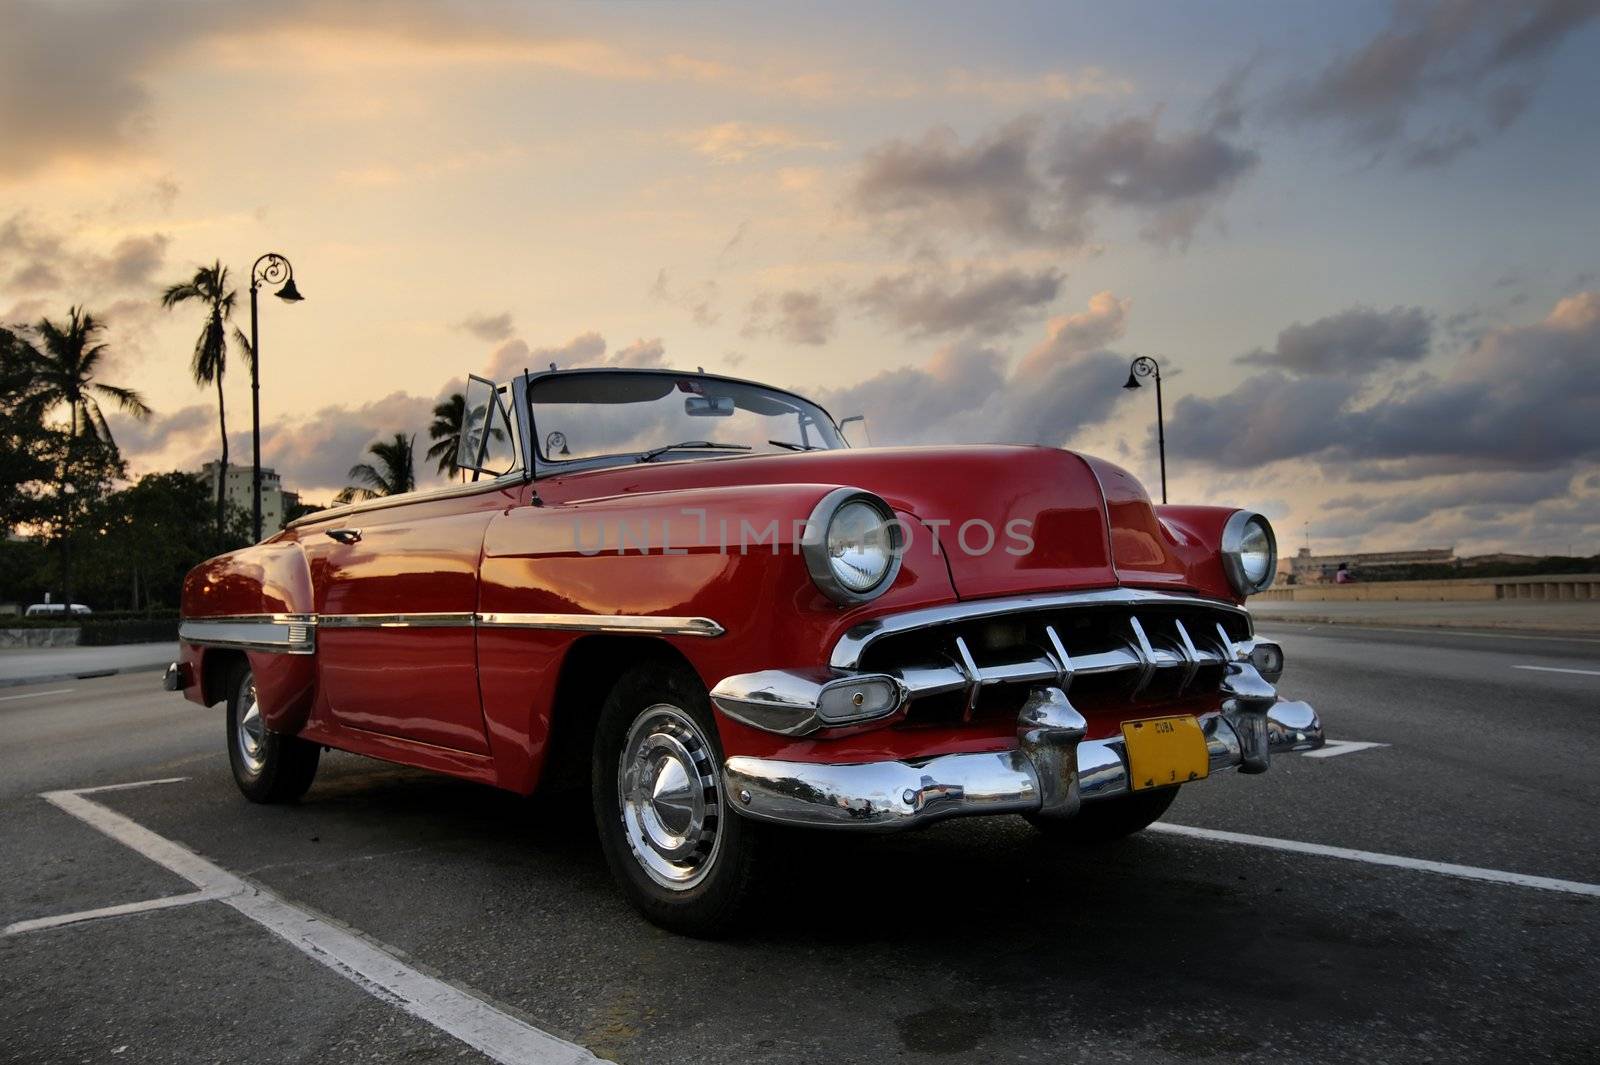 View of red classic vintage american car parked in havana street against sunset sky